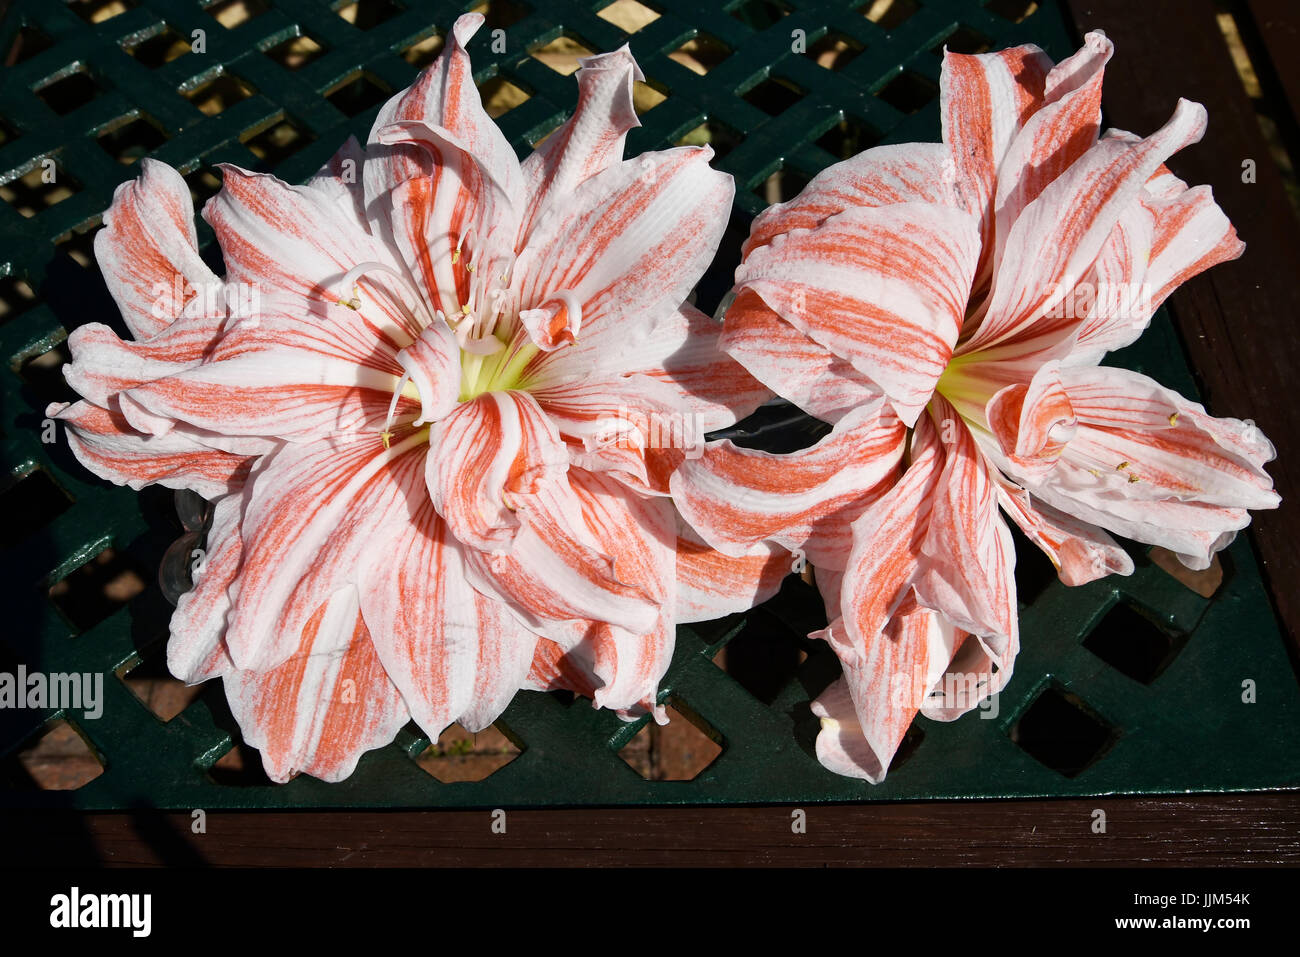 Still Life with Amaryllis flower blooming with a huge flower 9 inches across which flowers once a year Stock Photo